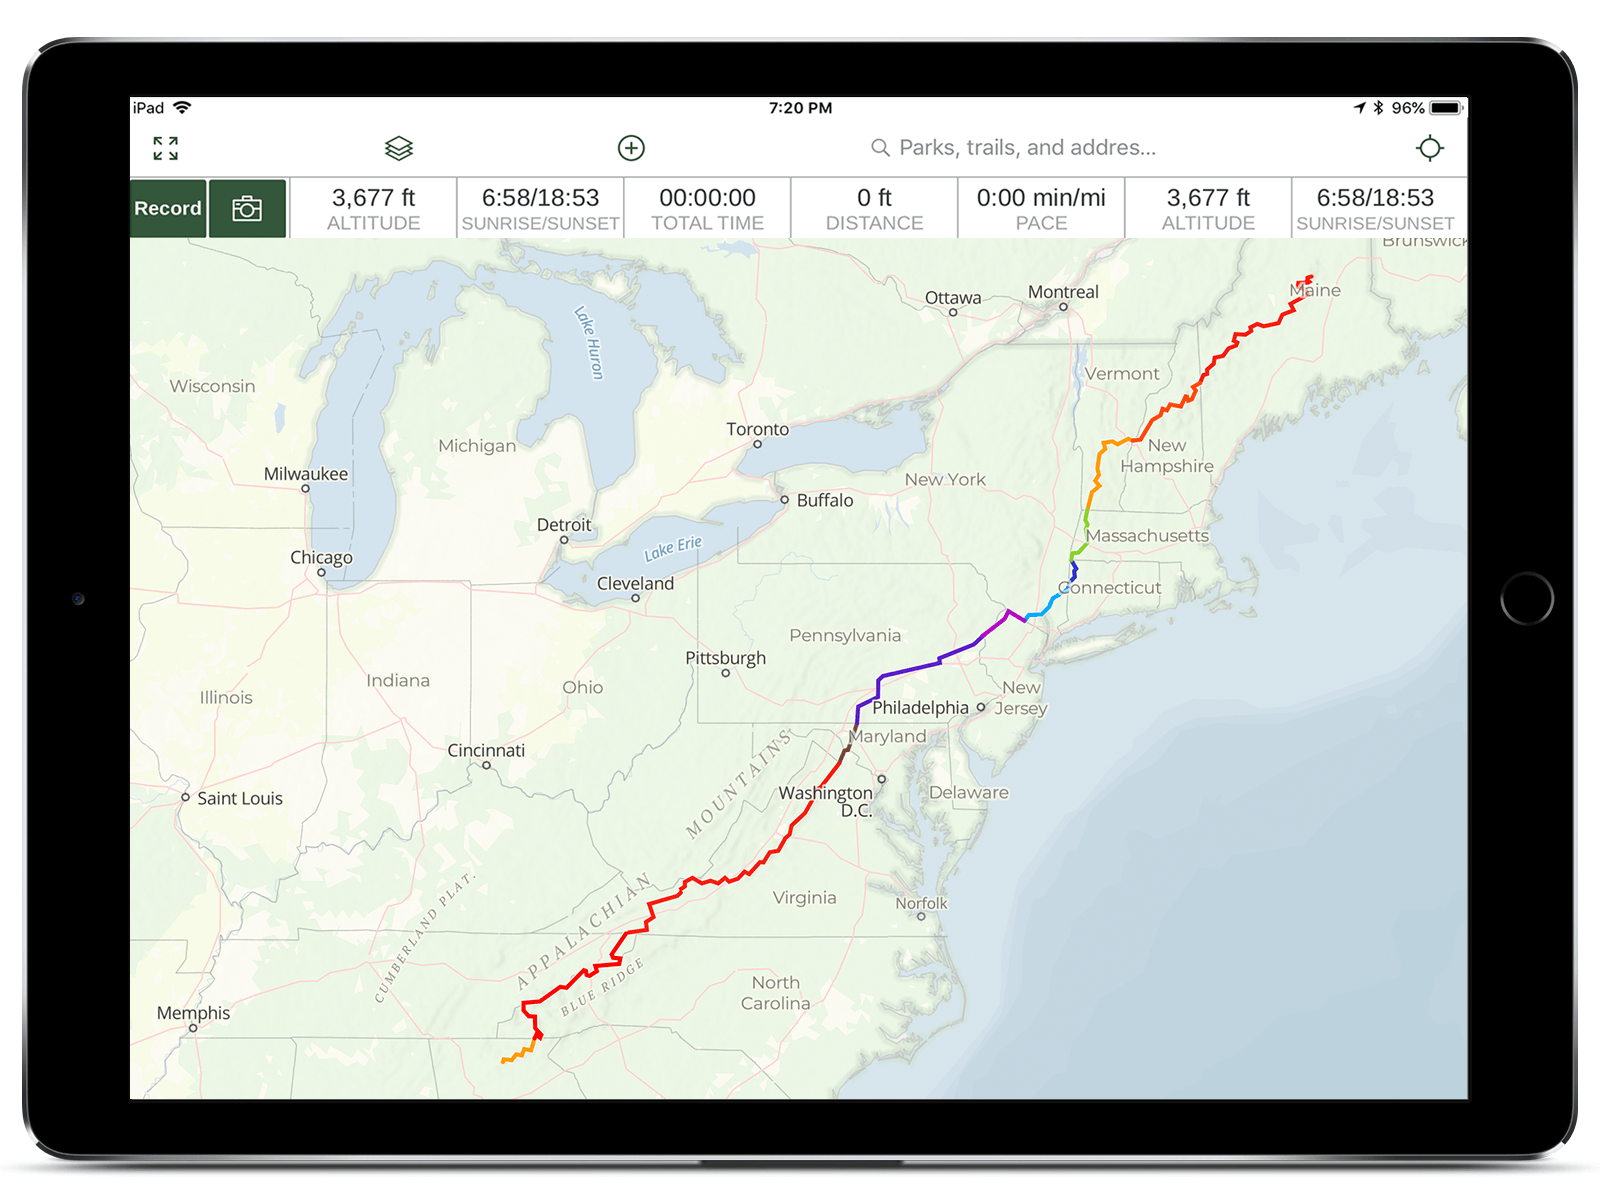 Appalachian Trail route pictured on Gaia GPS map